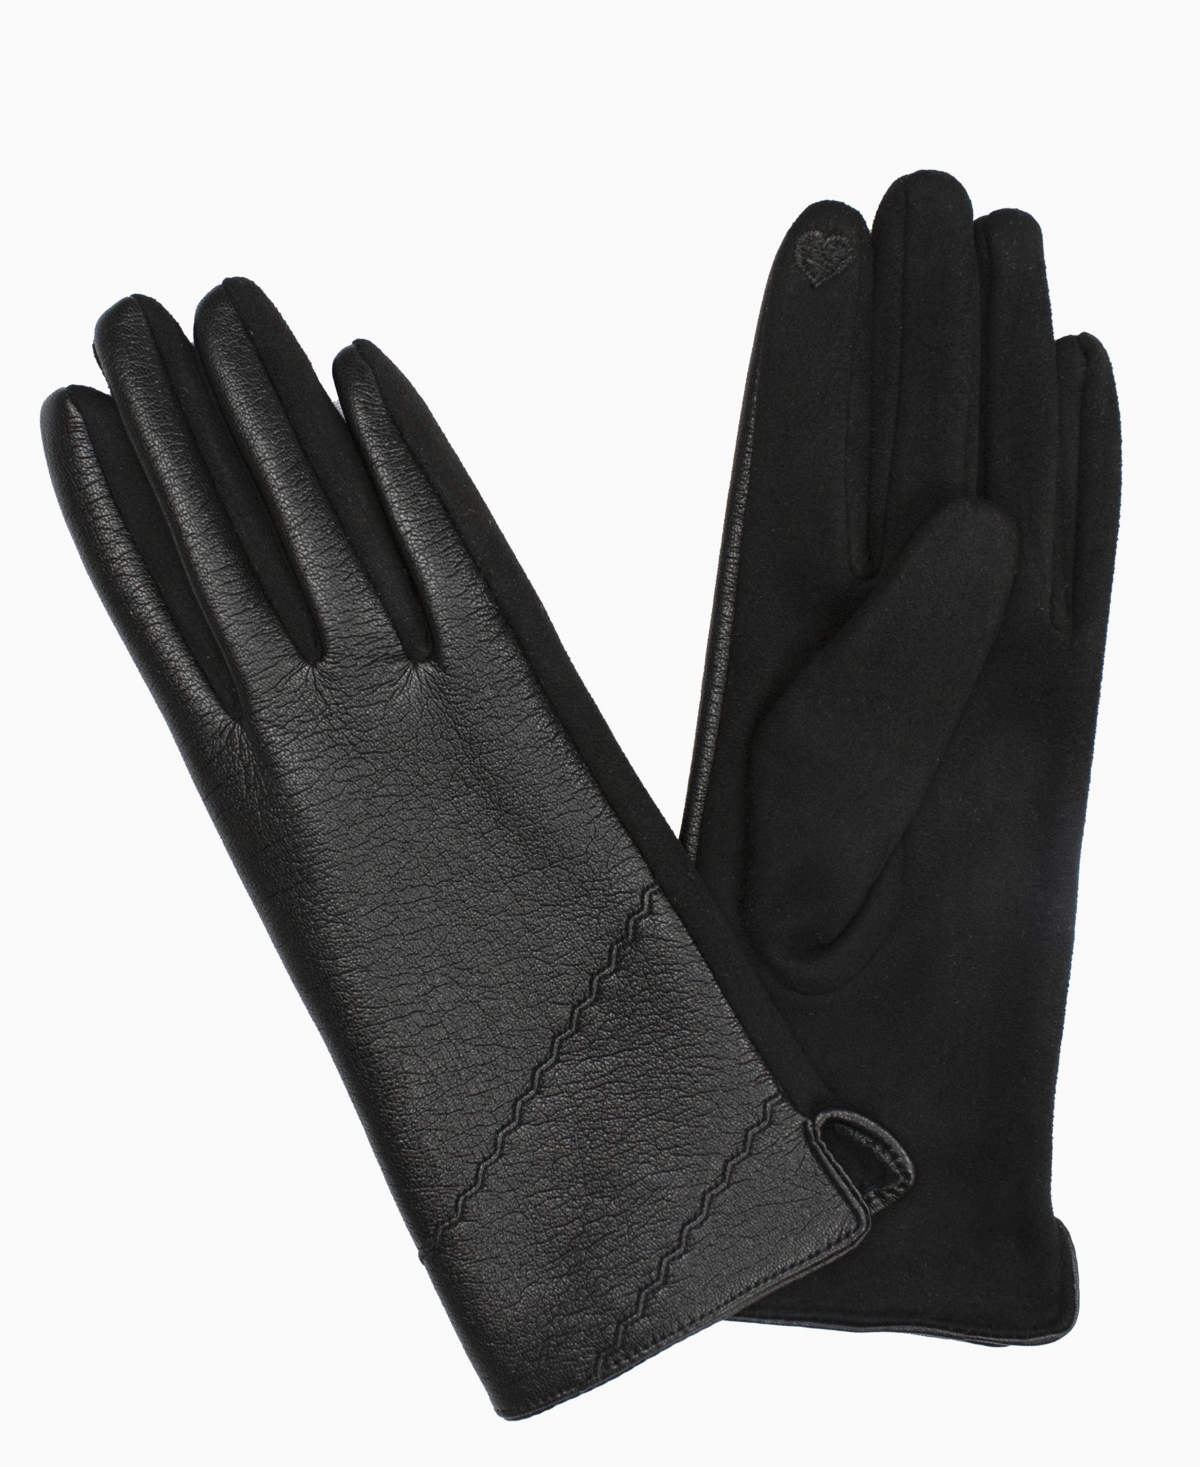 Marcus Adler Women's Vegan Leather Stitched Touchscreen Gloves